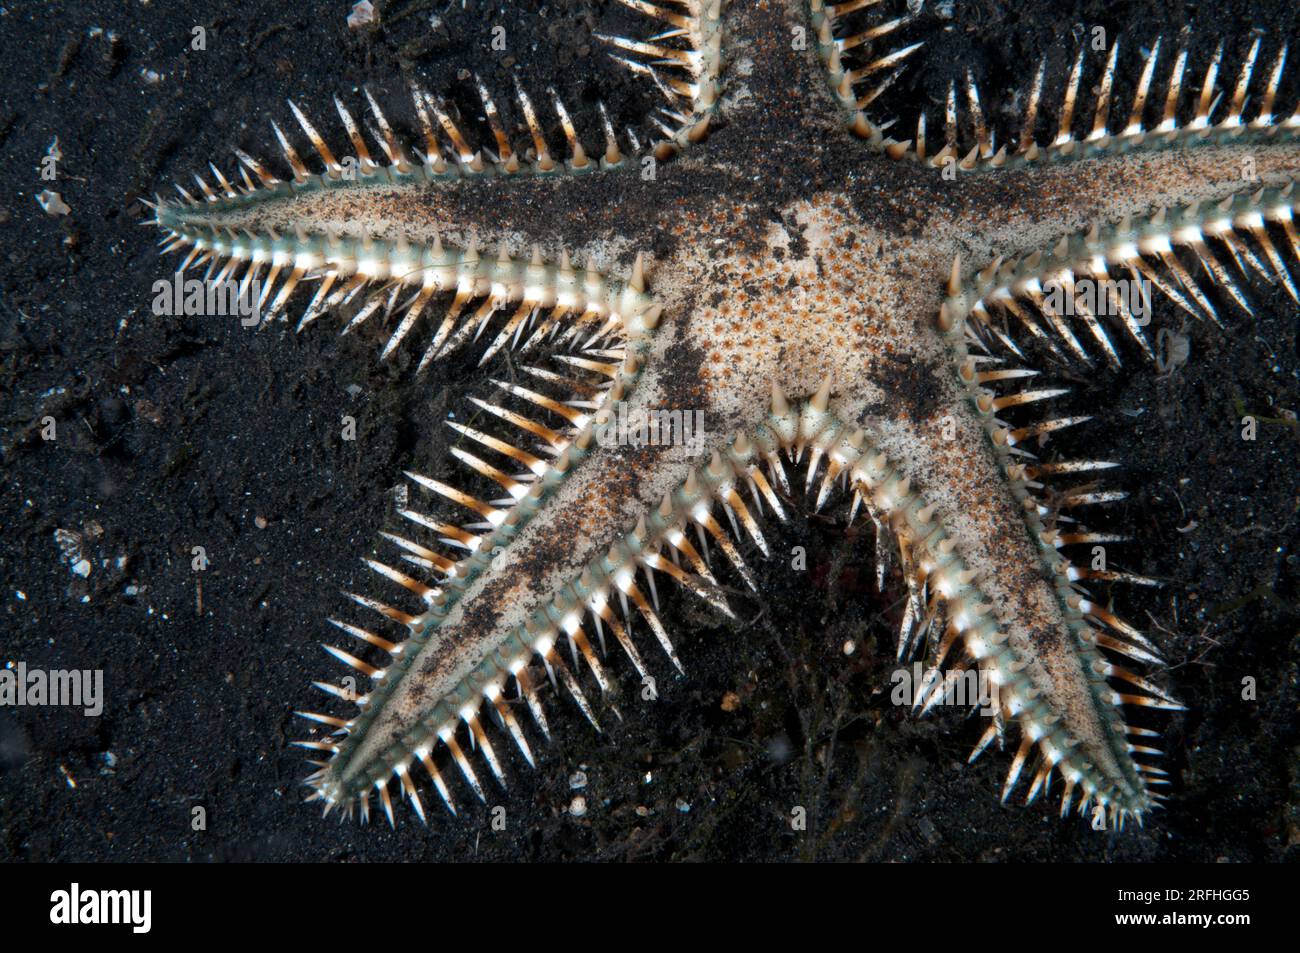 Nocturnal Sand Sifting Sea Star, Astropecten polyacanthus, on sand, night dive, TK1 dive site, Lembeh Straits, Sulawesi, Indonesia Stock Photo